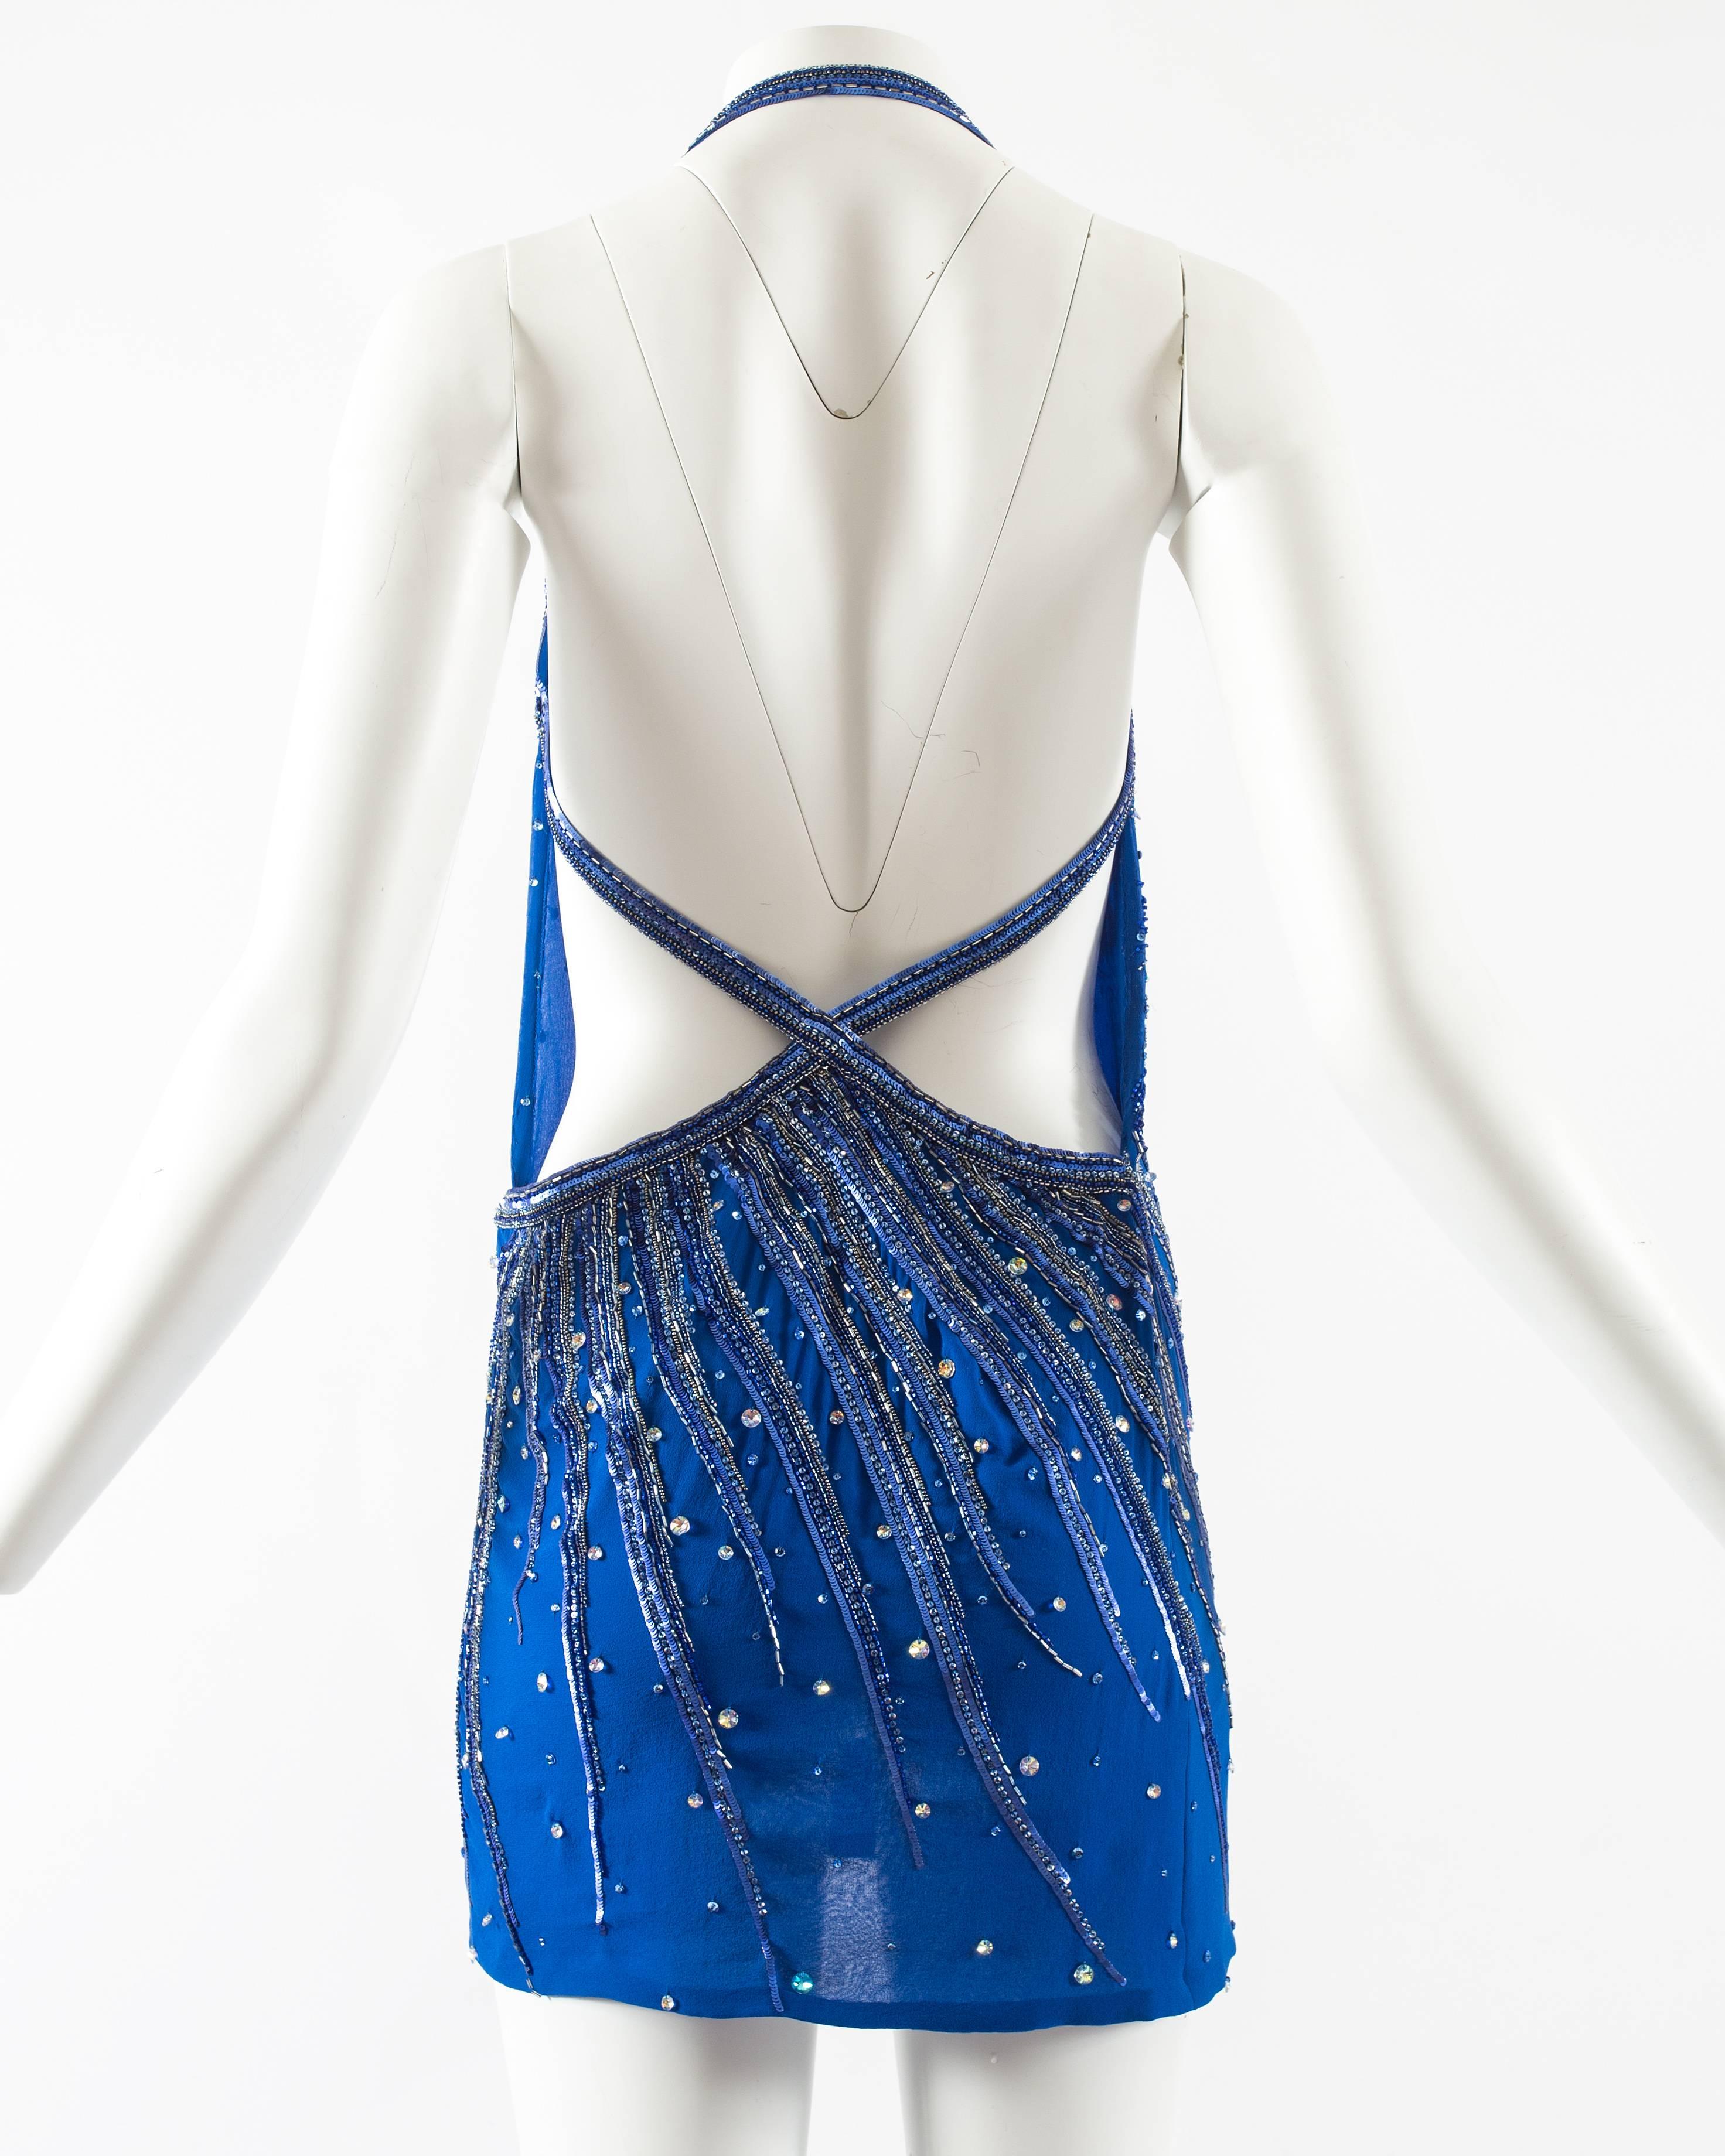 Atelier Versace Haute Couture 1990s embellished halter neck mini dress with low back

- thousands of hand sew beads and rhinestones 
- internal boning 
- 100% silk chiffon